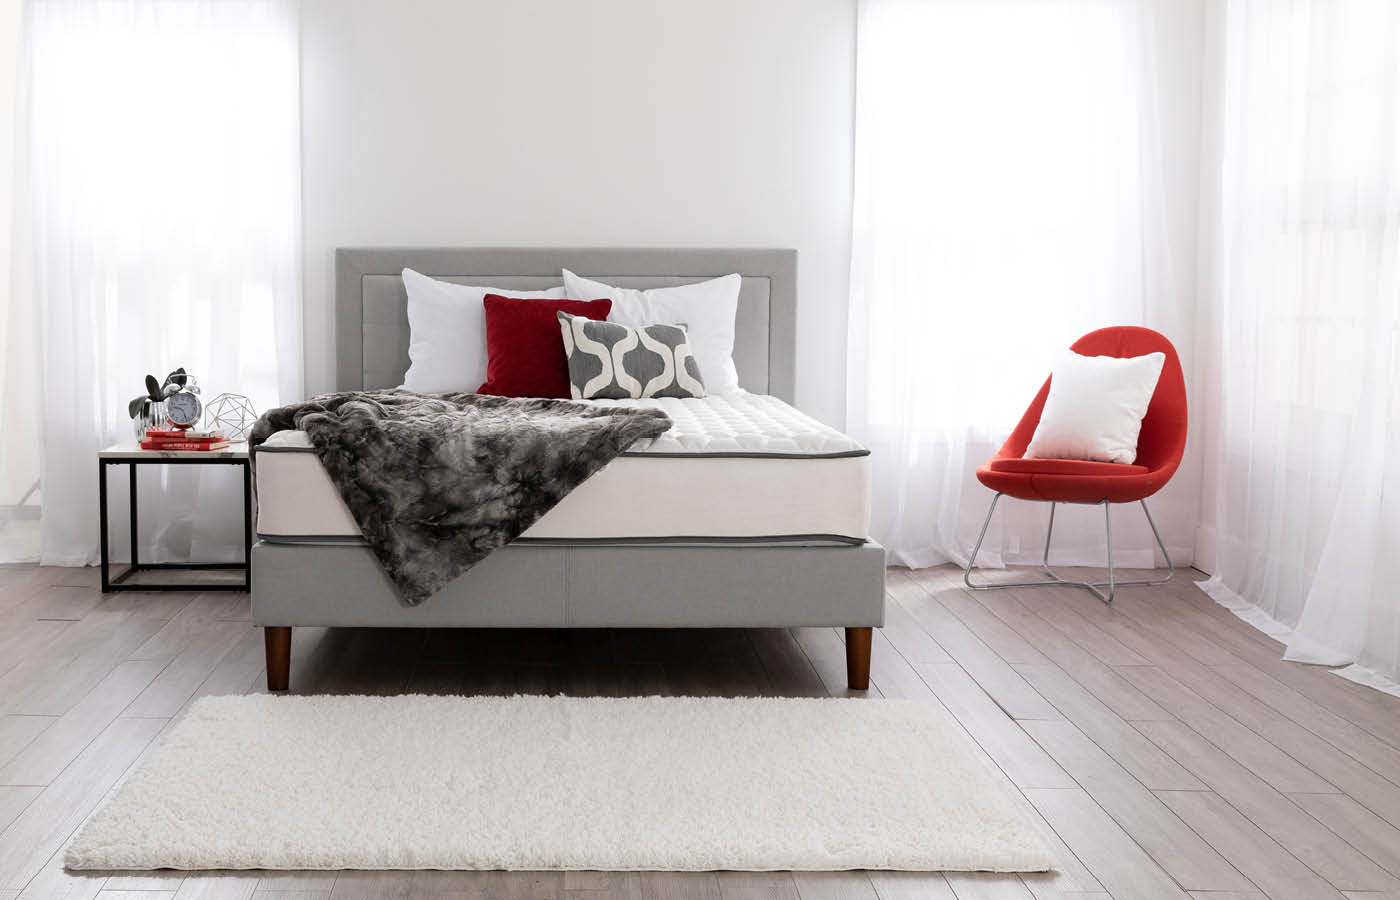 6 Tips in Selecting a Mattress That's Right For You